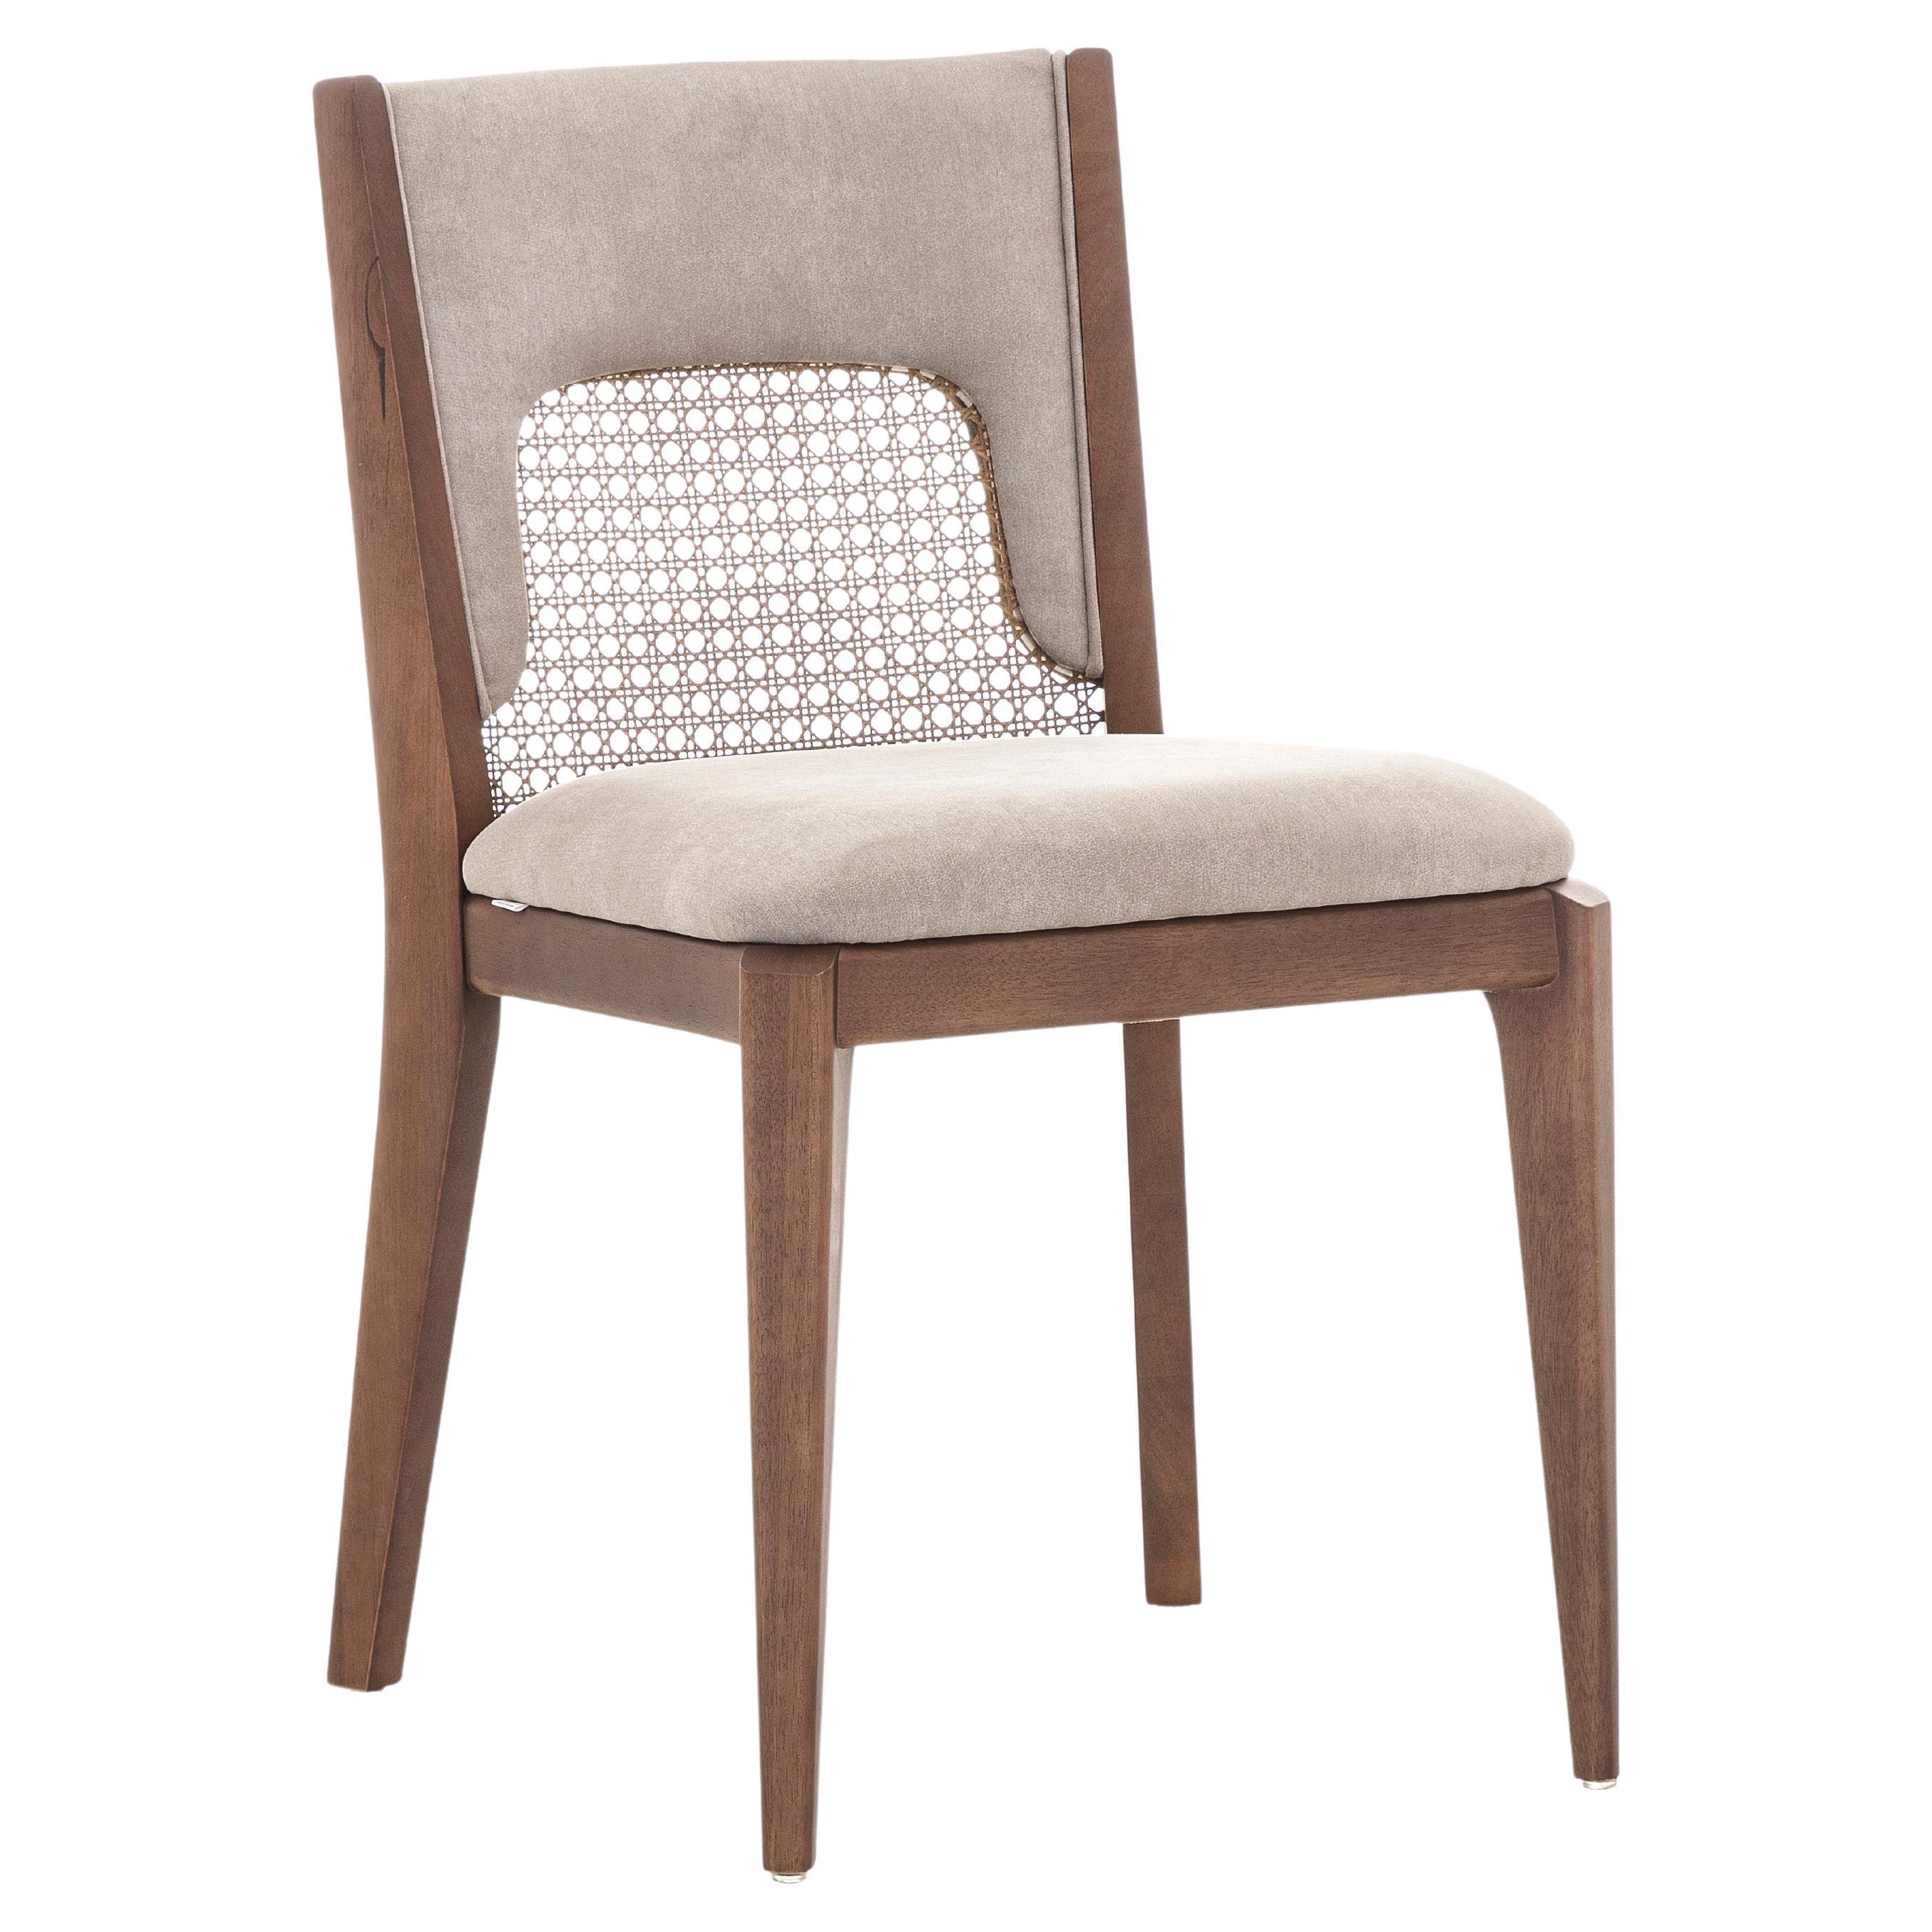 The Zani dining chair is synonymous with style, elegance, comfort, and quality with its light brown upholstery back and walnut wood finish. With the Zani chair, Uultis has combined all of these qualities together. A simple cane in the back seat